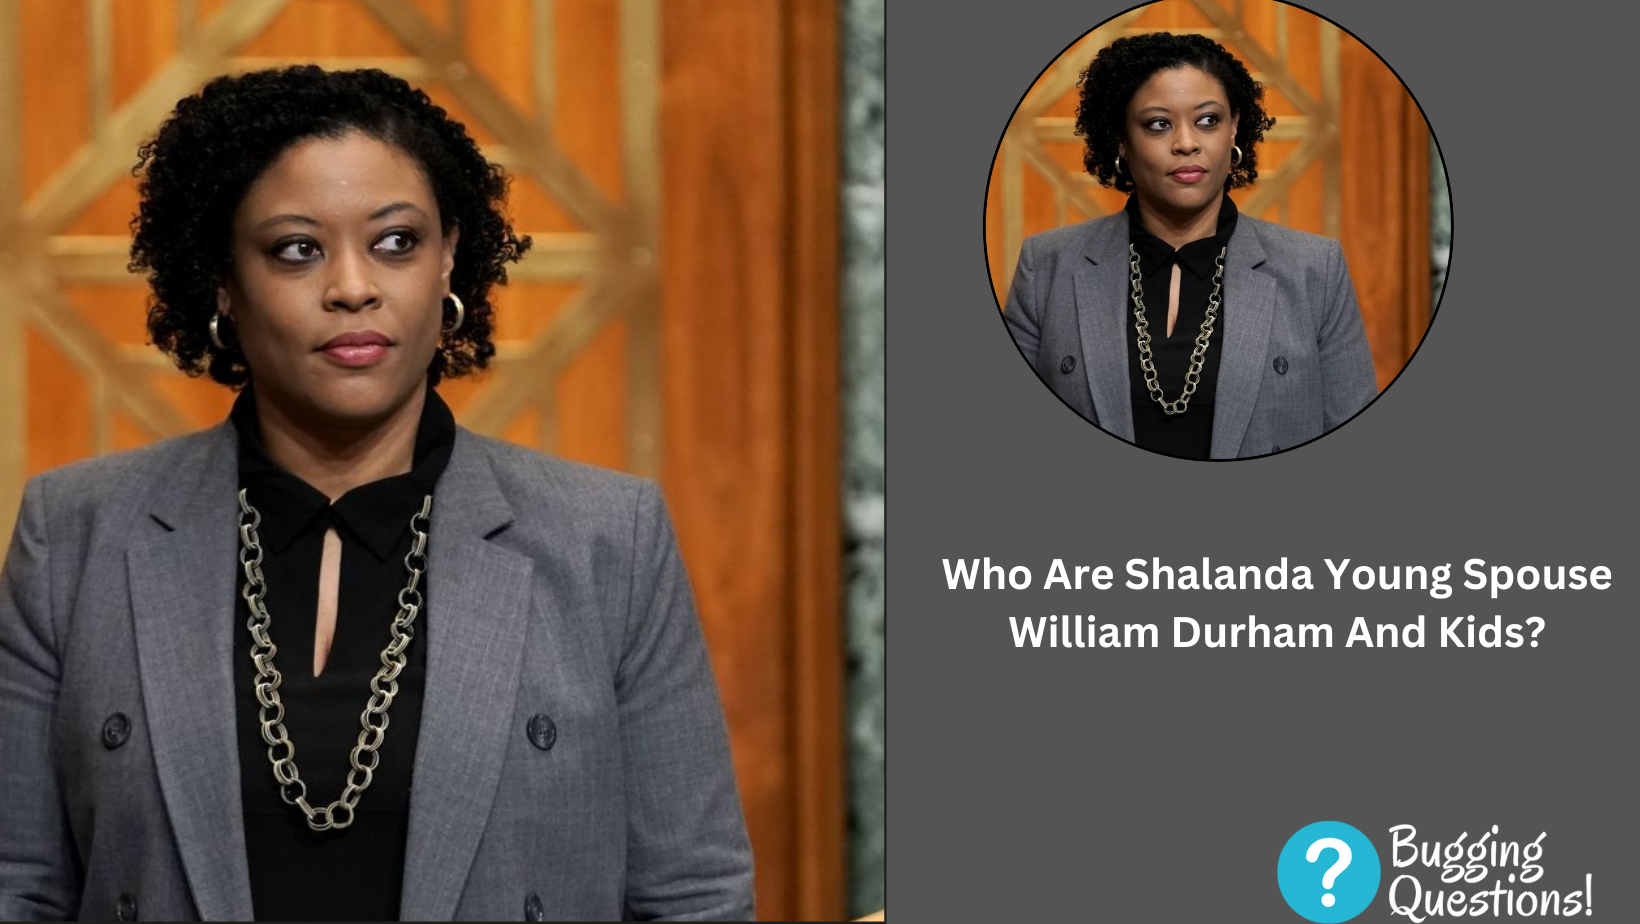 Who Are Shalanda Young Spouse William Durham And Kids?